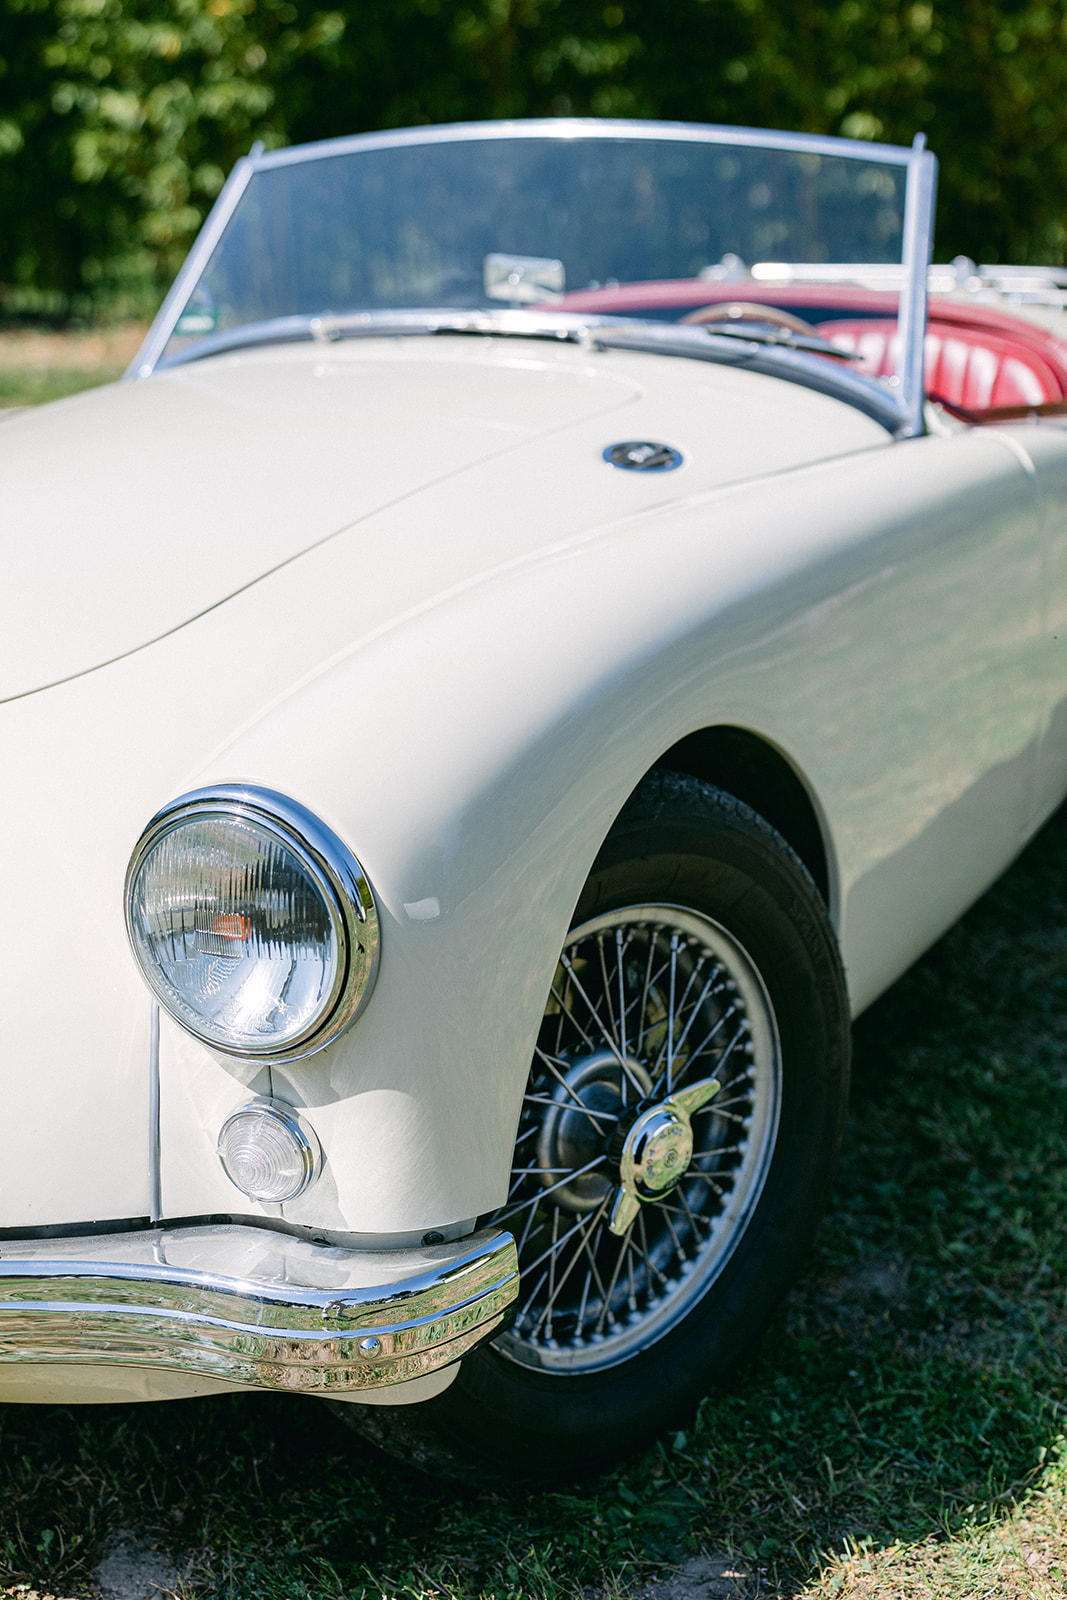 A view of the Provence Classics 1958 MGA Roadster